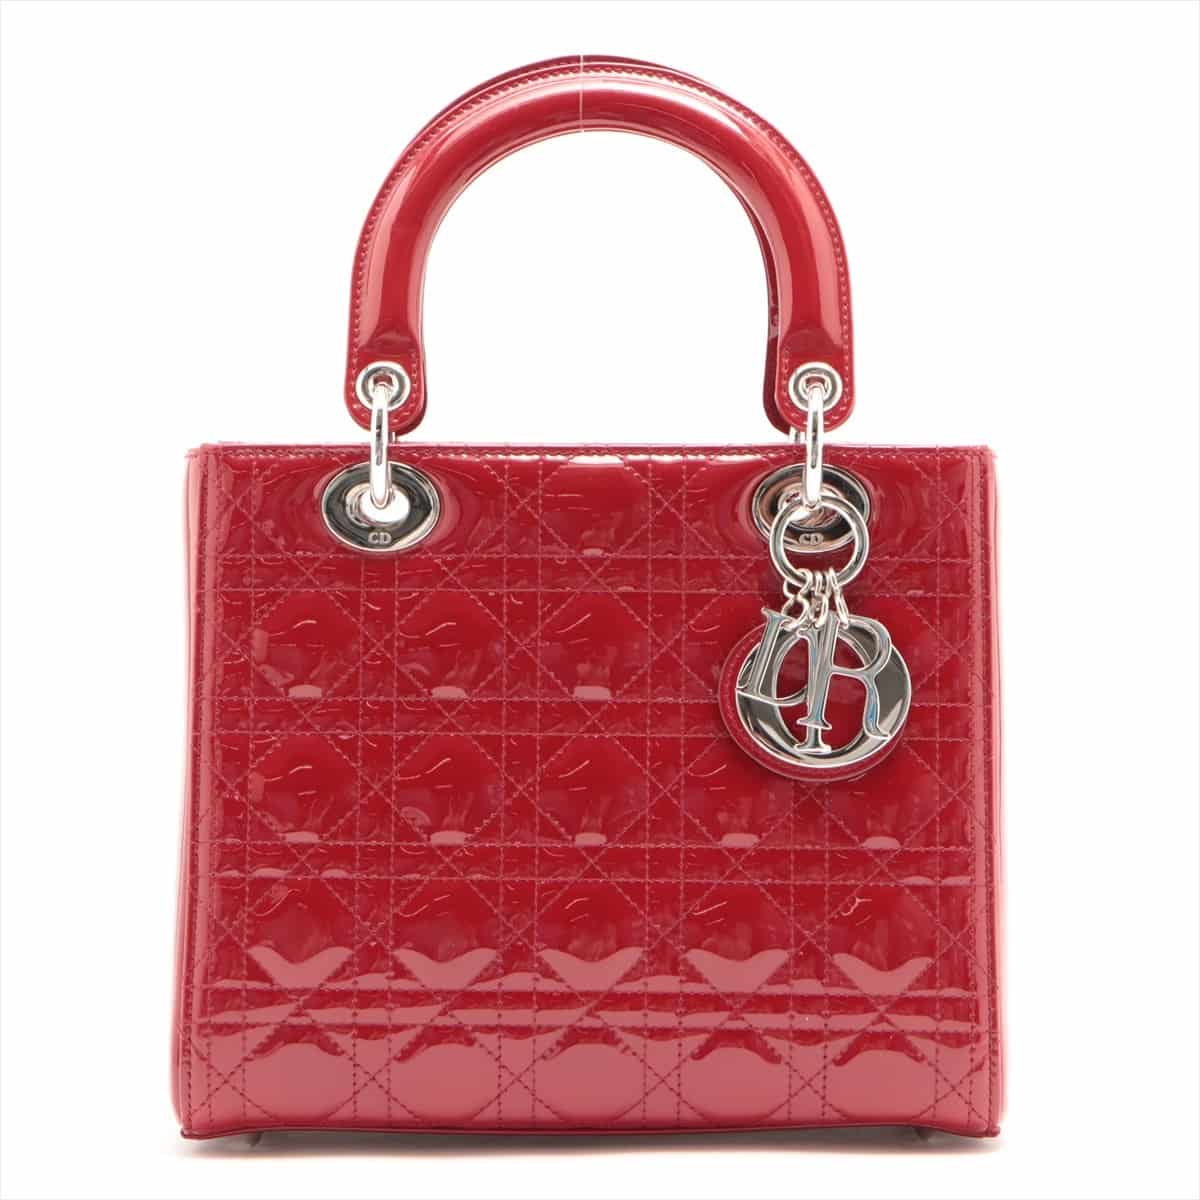 Christian Dior Lady Dior Cannage Patent leather 2way handbag Red